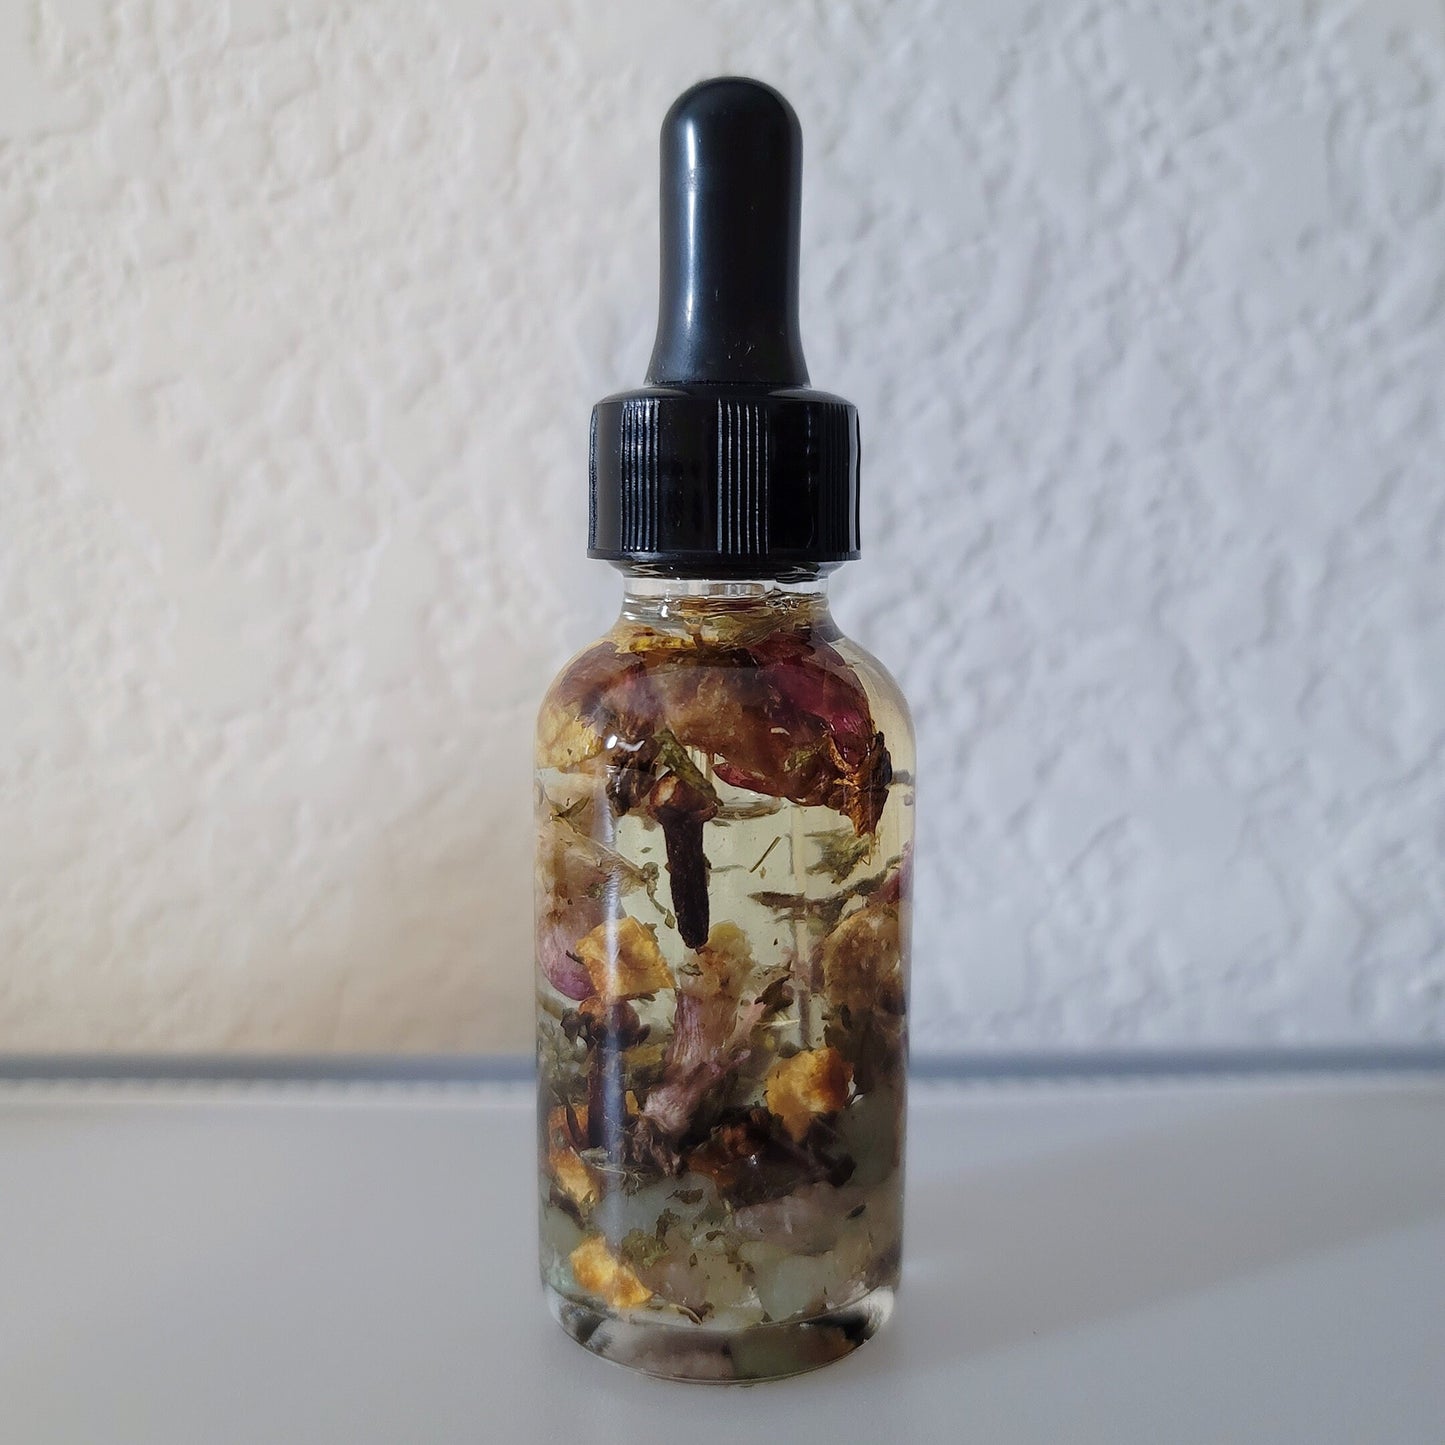 Freyr God Oil | Ritual & Spell Work, Altars, Invocation, Manifestation, and Intentions